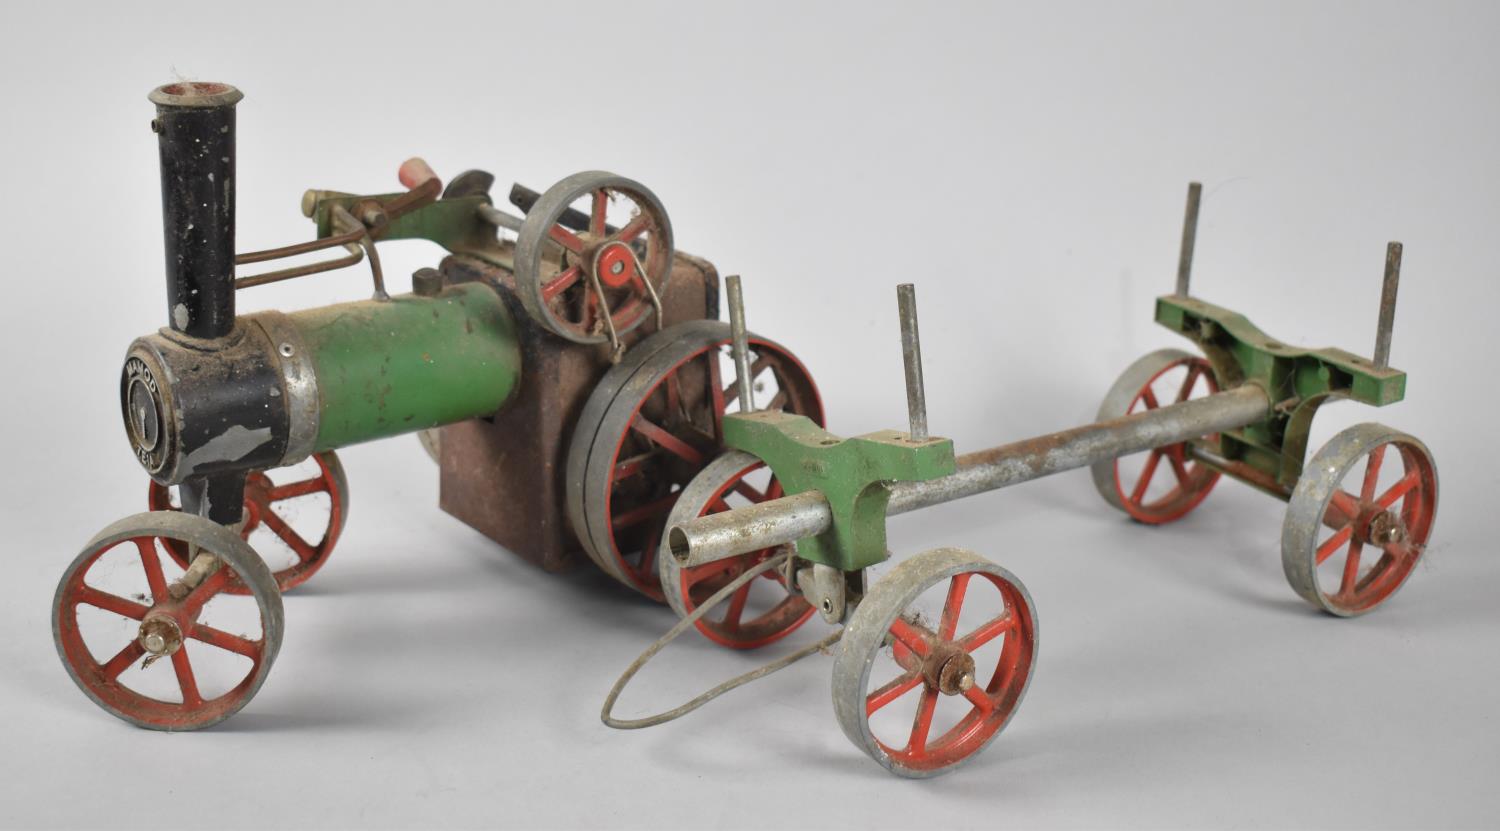 A Vintage Mamod Traction Engine and Log Trailer, In need of General Upgrading